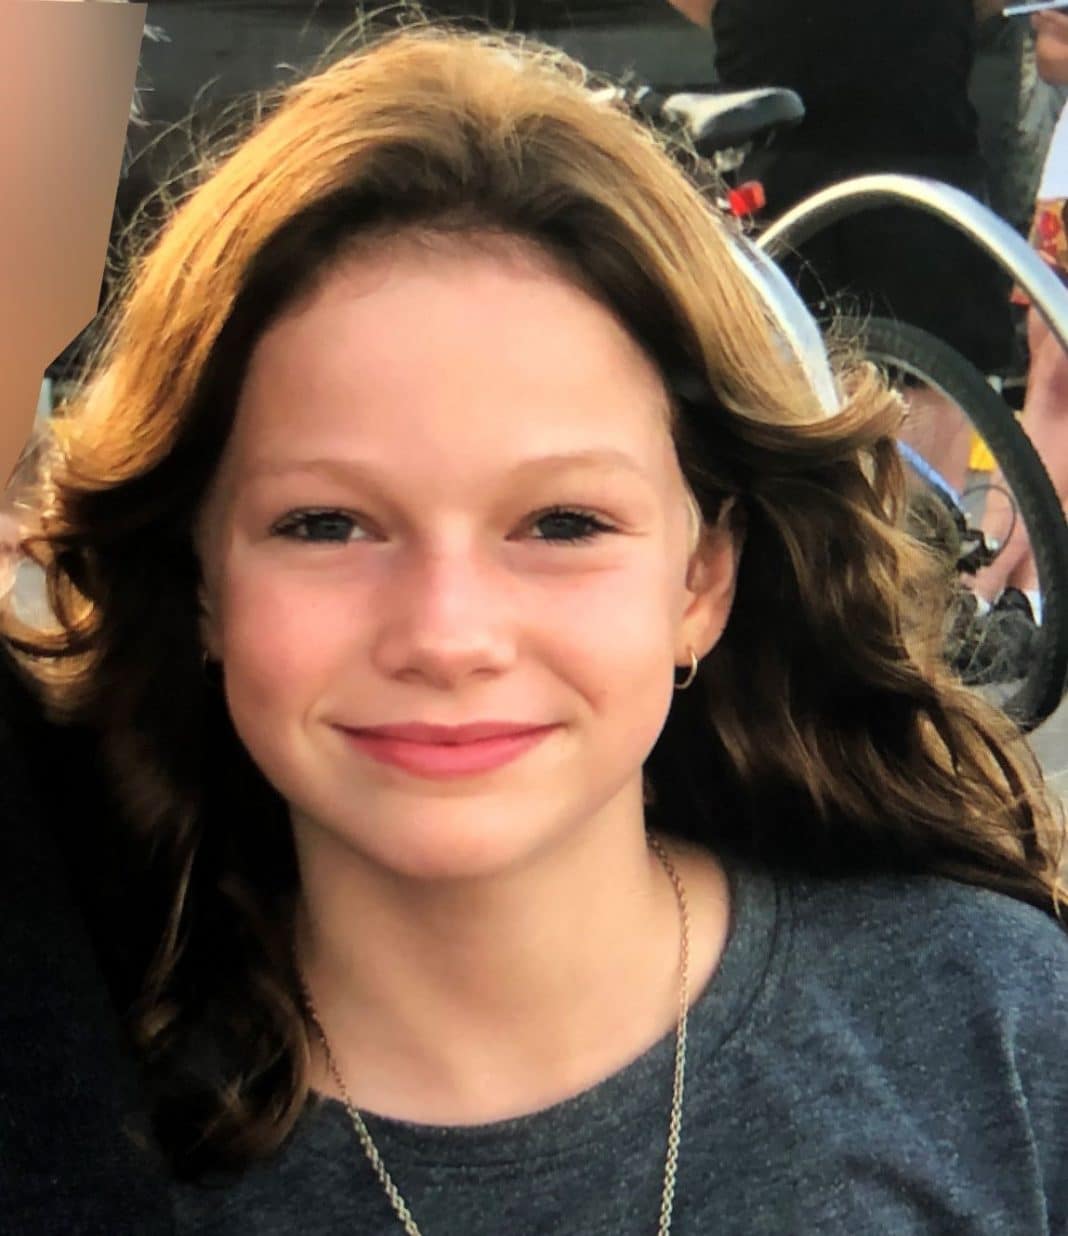 snapshot of 11-year-old girl Ava Milliken, reported missing from Weston Creek